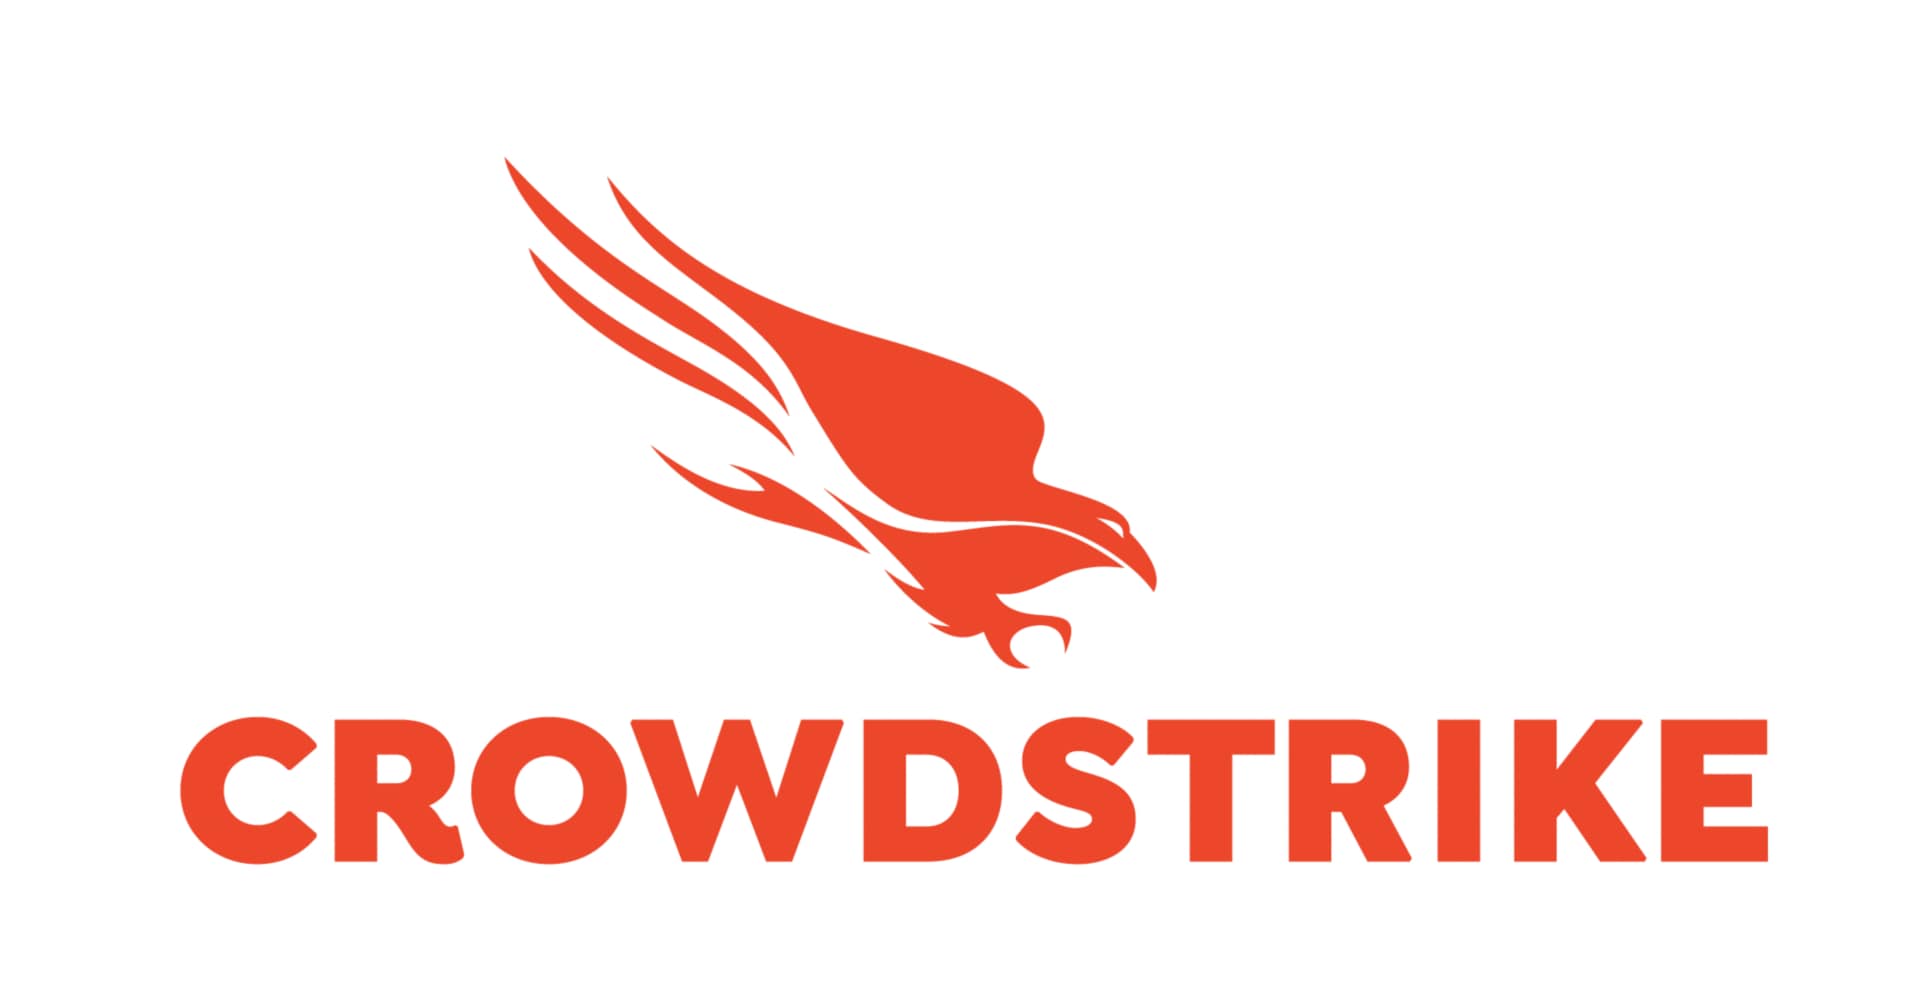 CrowdStrike 60-Month Insight for Mobile (Requires Falcon for Mobile)